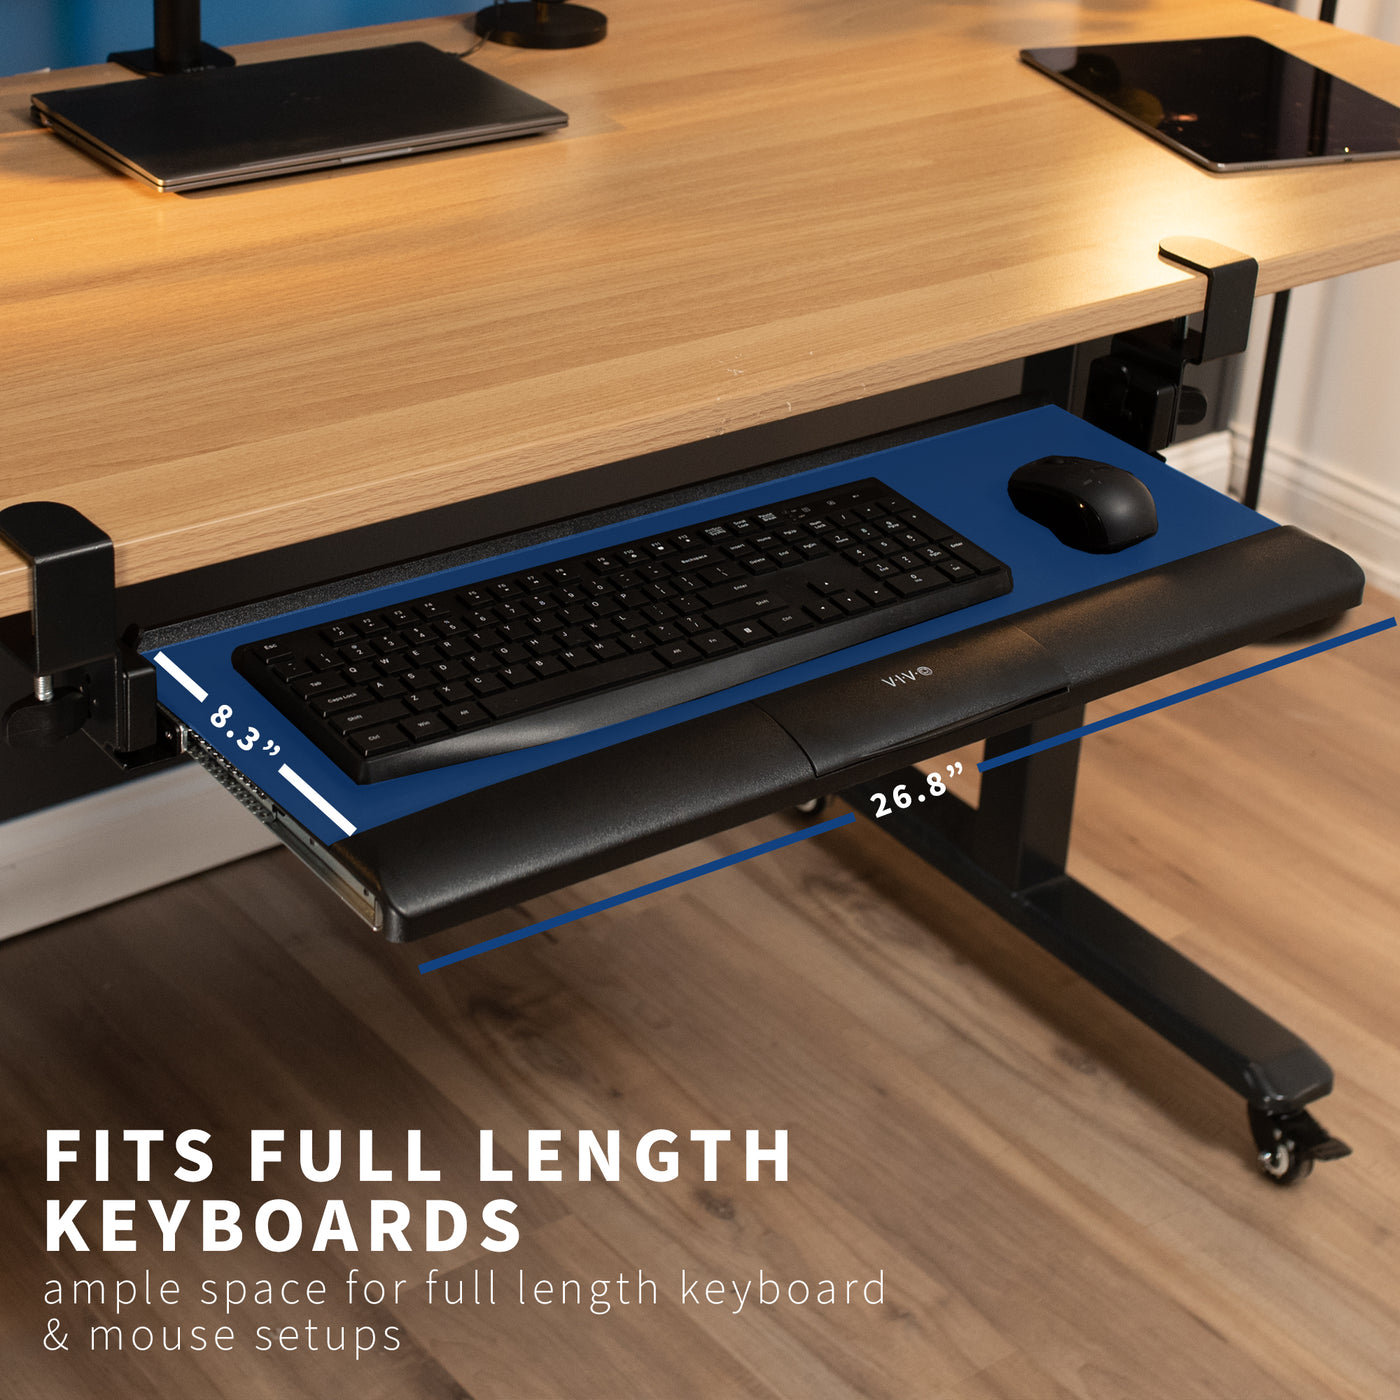 Easy install clamp-on pullout tilting keyboard tray with customized typing angles.